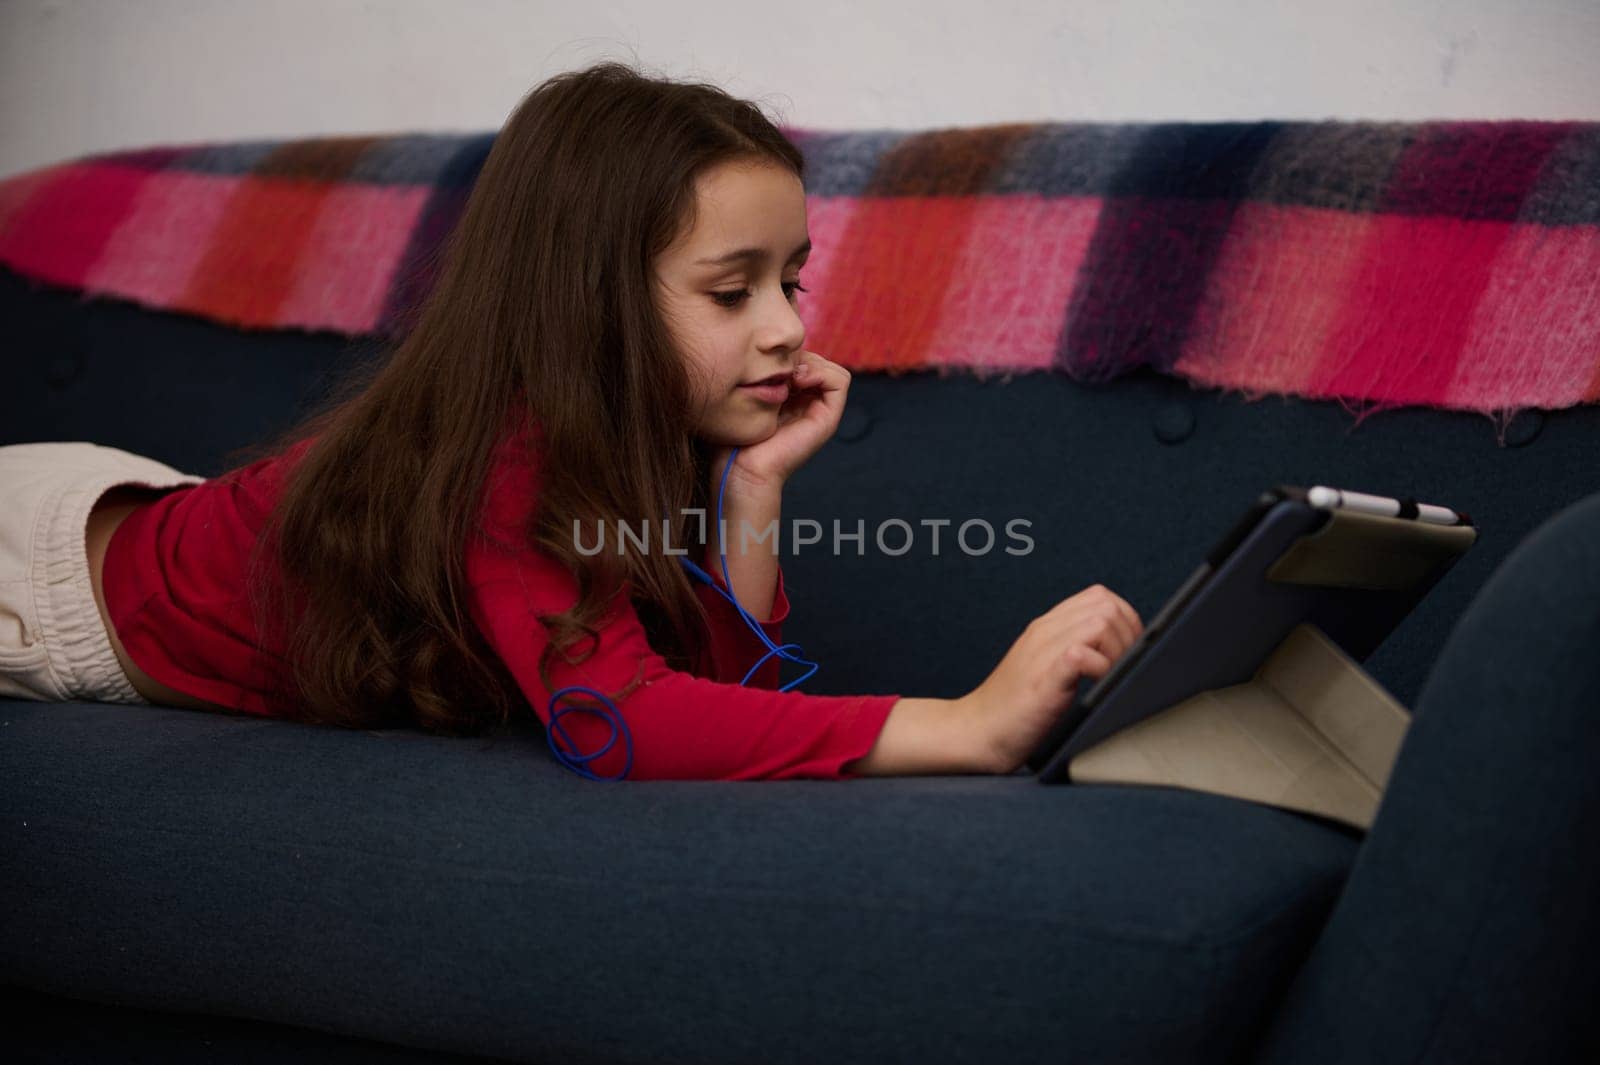 Adorable elementary age kid, cute little kid girl using digital tablet, watching movies while lying on the sofa at cozy home interior. Distance learning. Online education. Digital gadget addiction by artgf